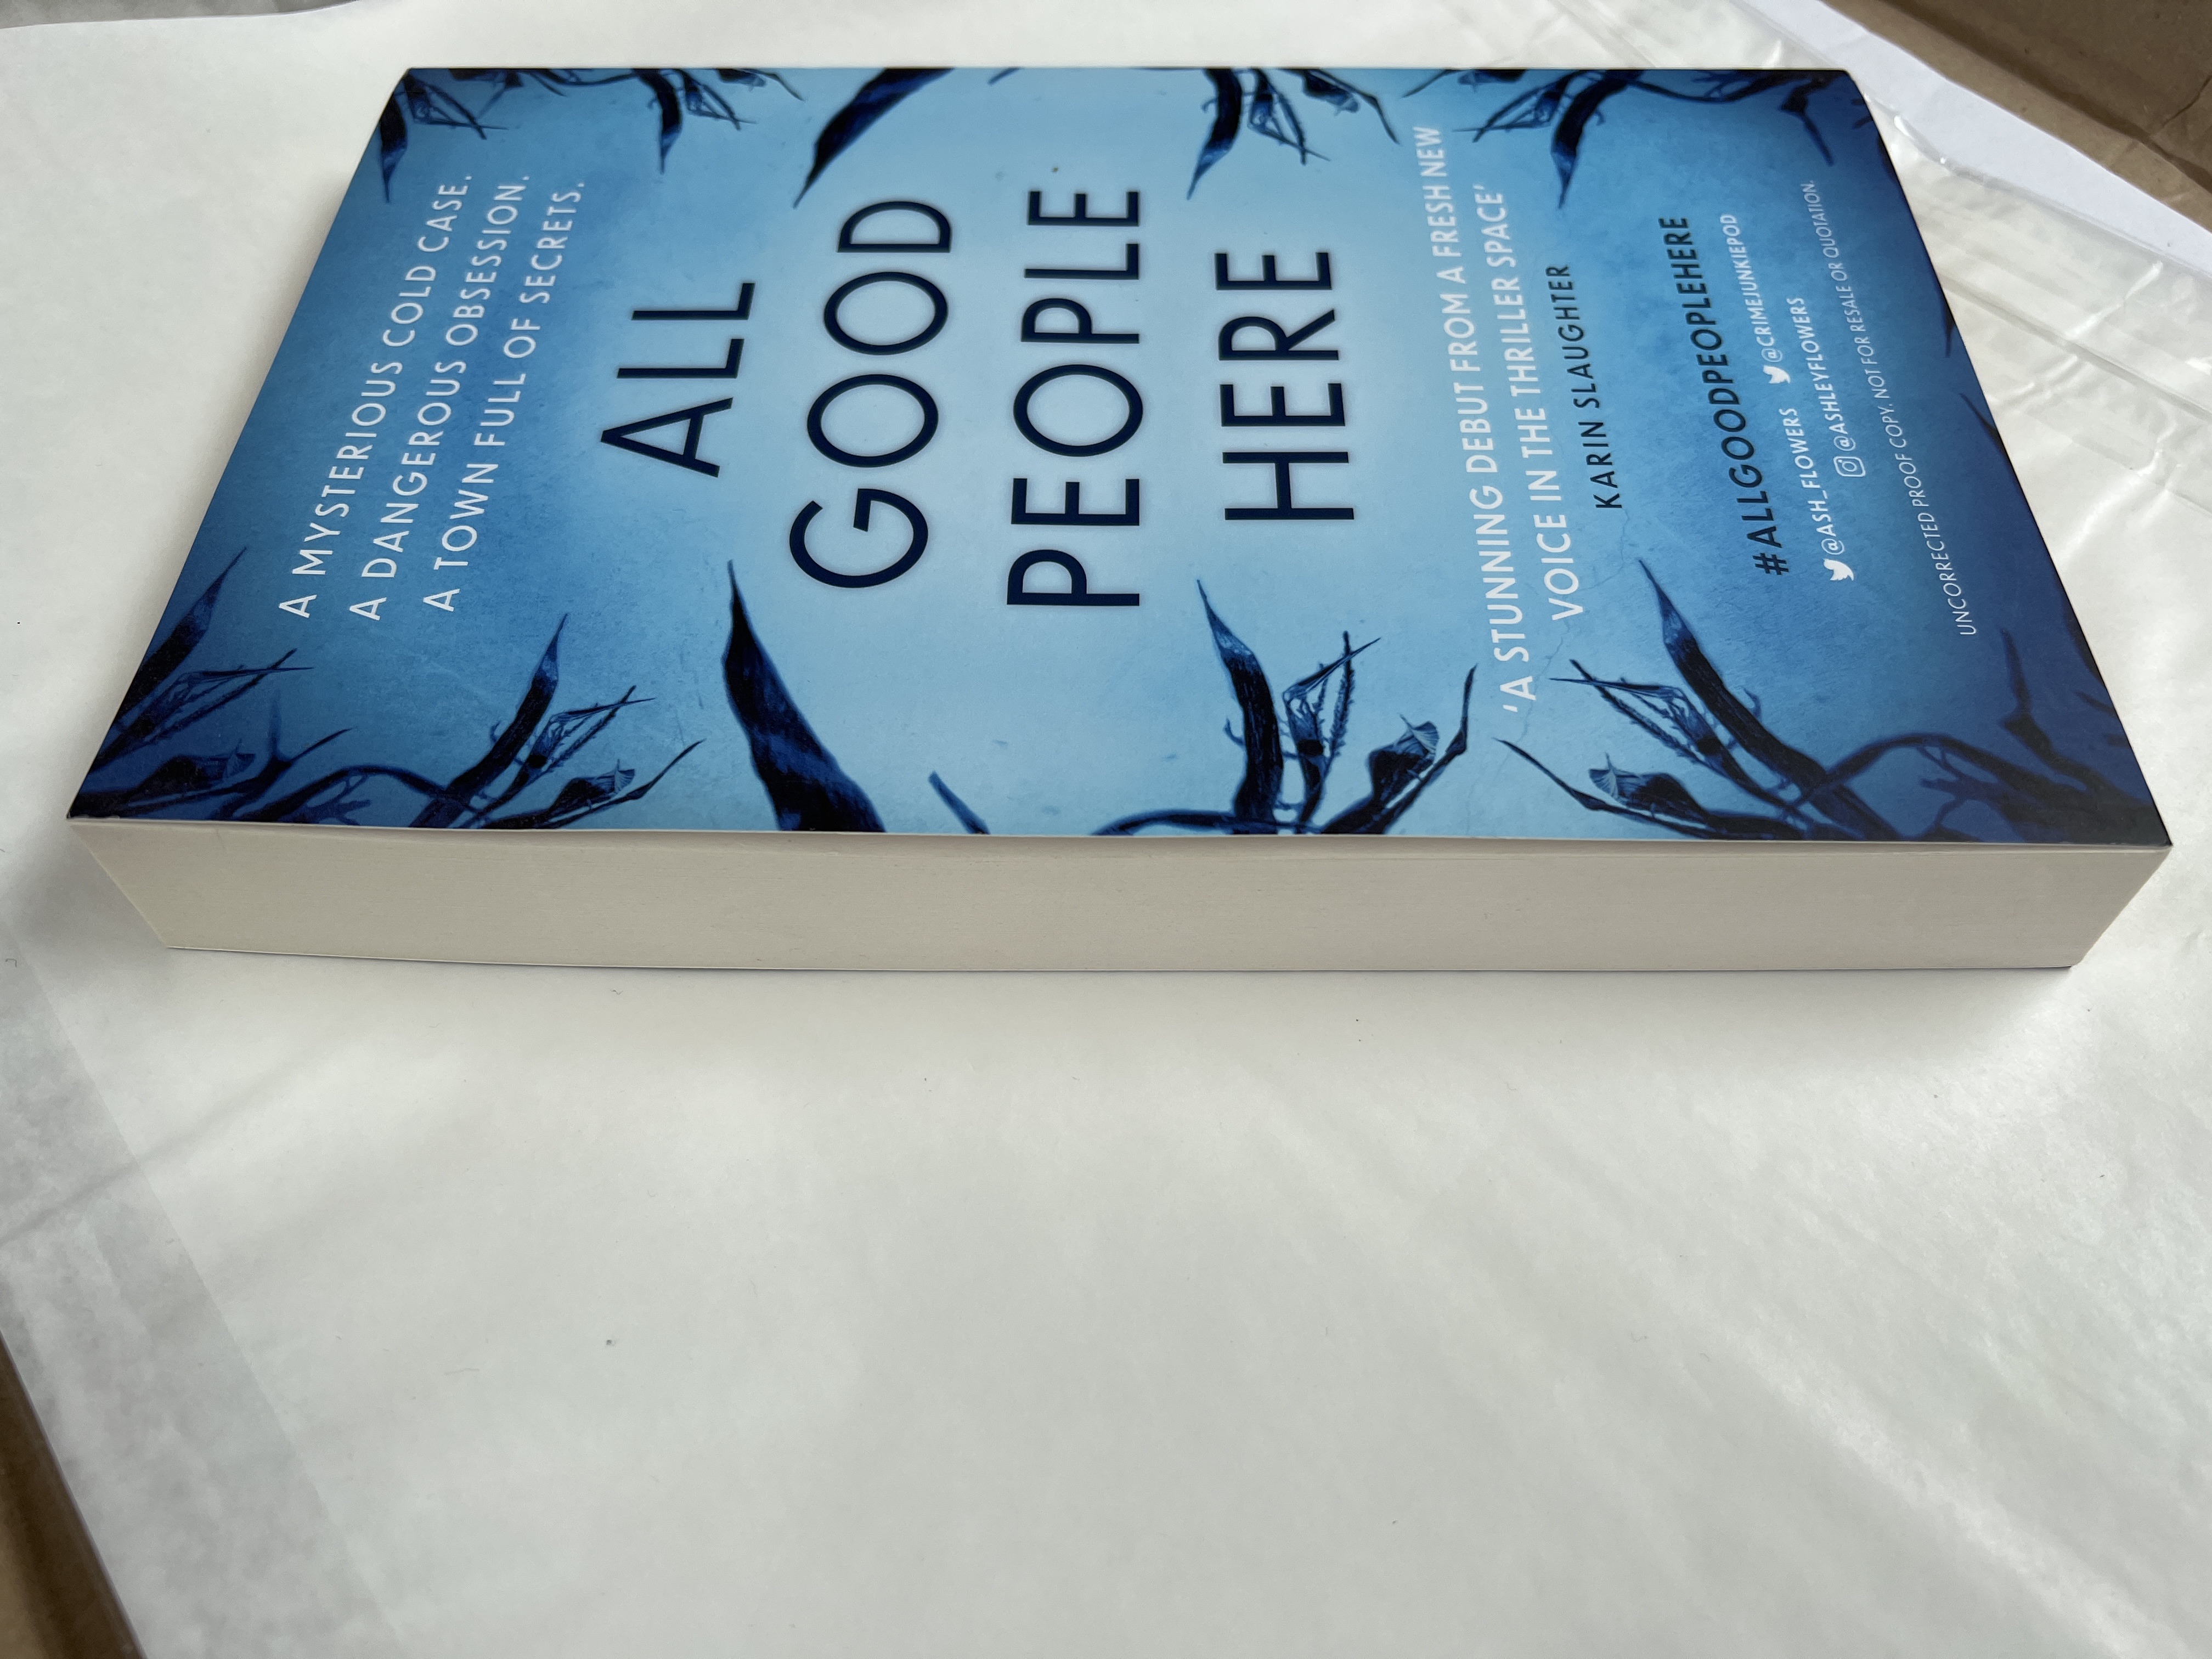 ---　Uncorrected　(2022)　SAVERY　All　Good　Copy　by　Good　Here　Very　Flowers:　People　Proof　Proof　BOOKS　Ashley　Paperback　UNCORRECTED　Copy